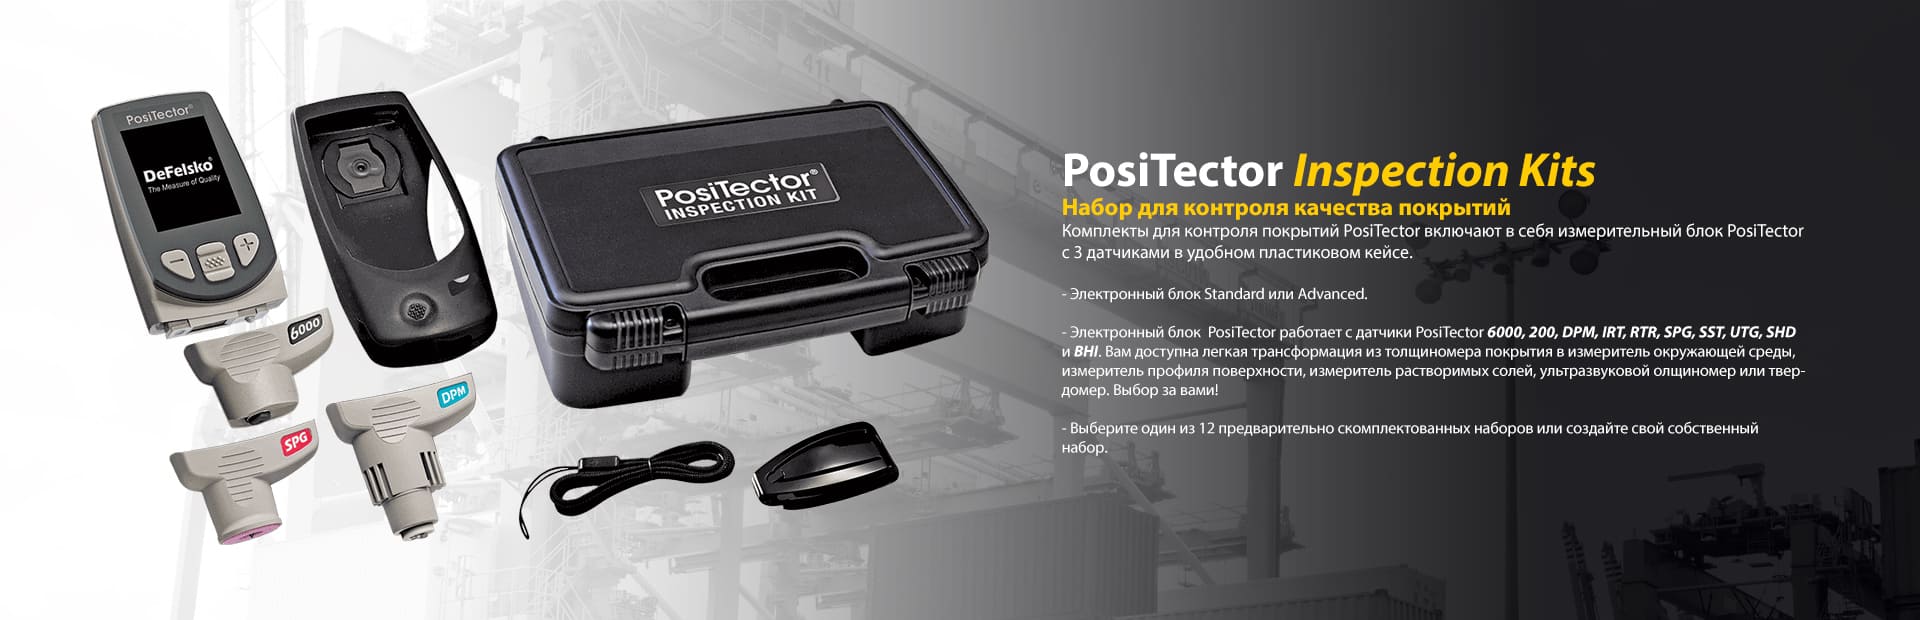 PosiTector Inspections Kits